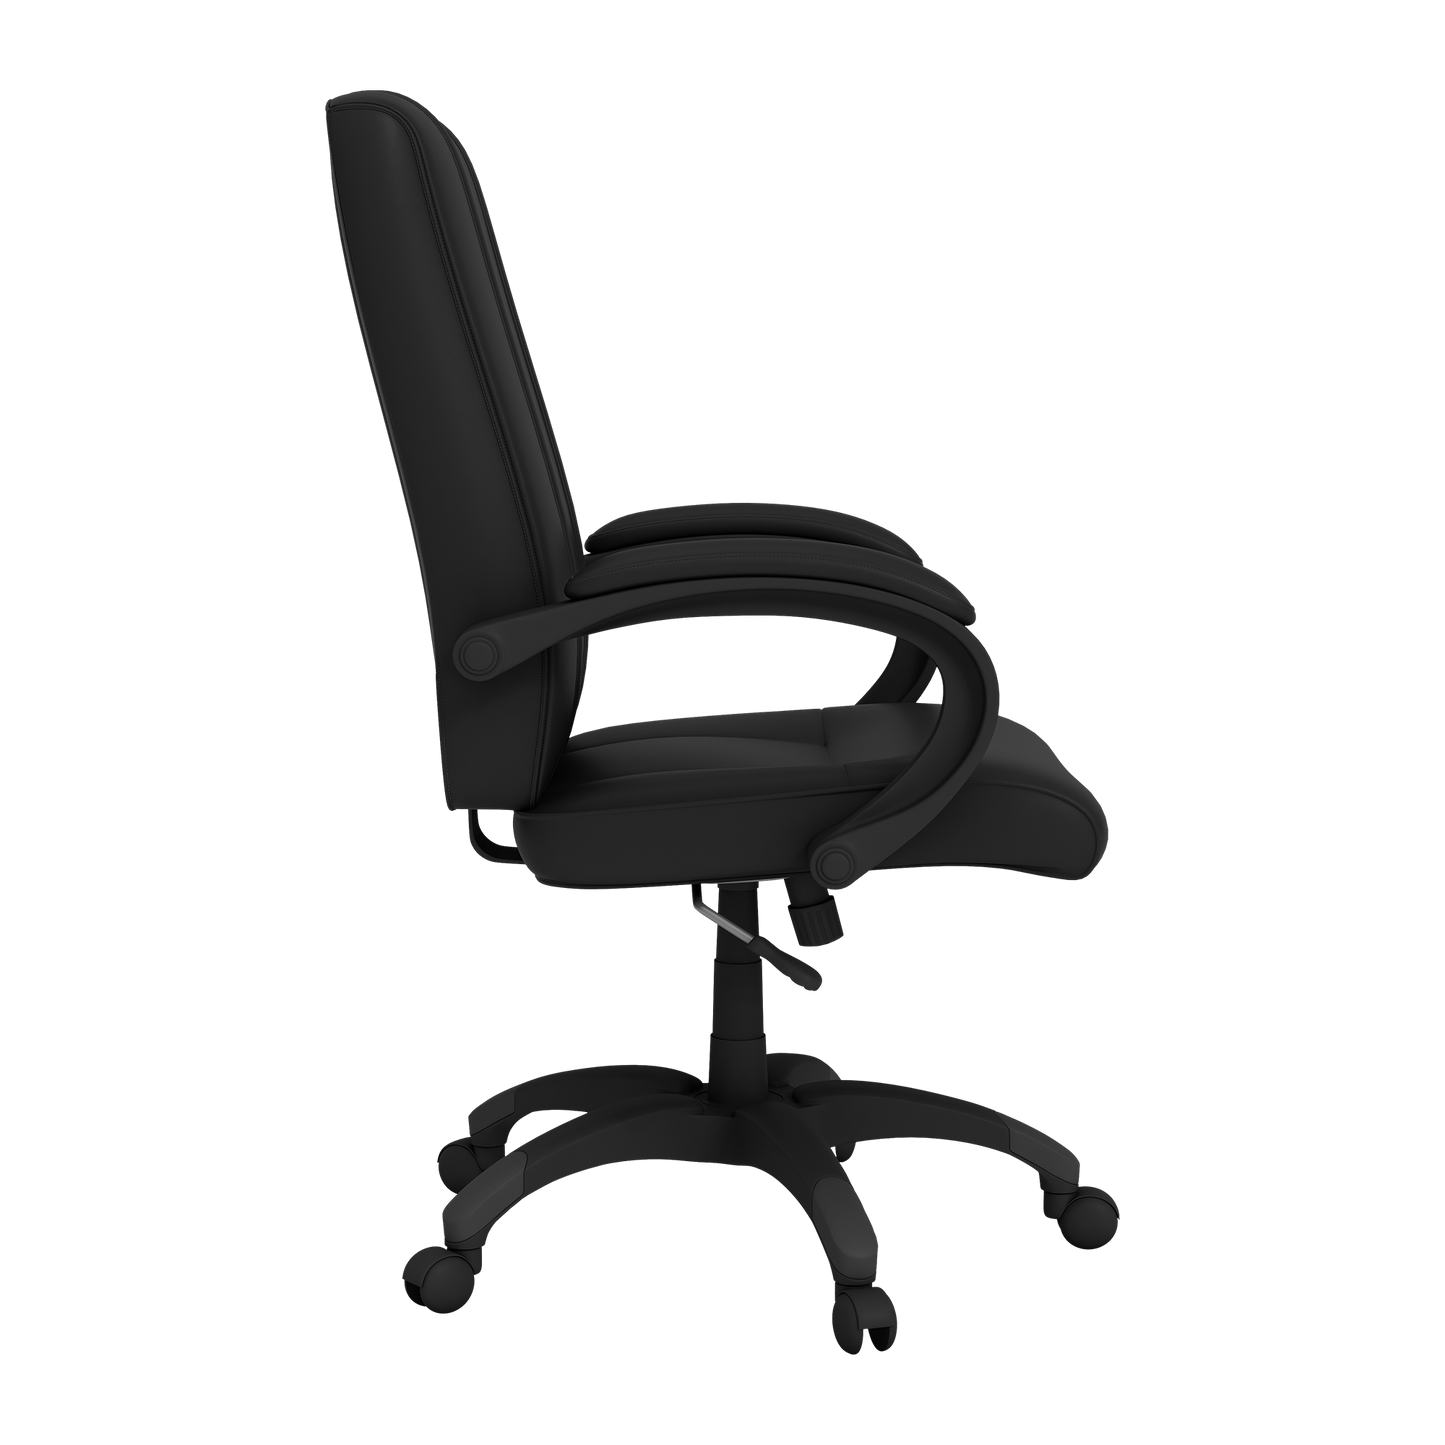 Office Chair 1000 with Los Angeles Lakers Logo